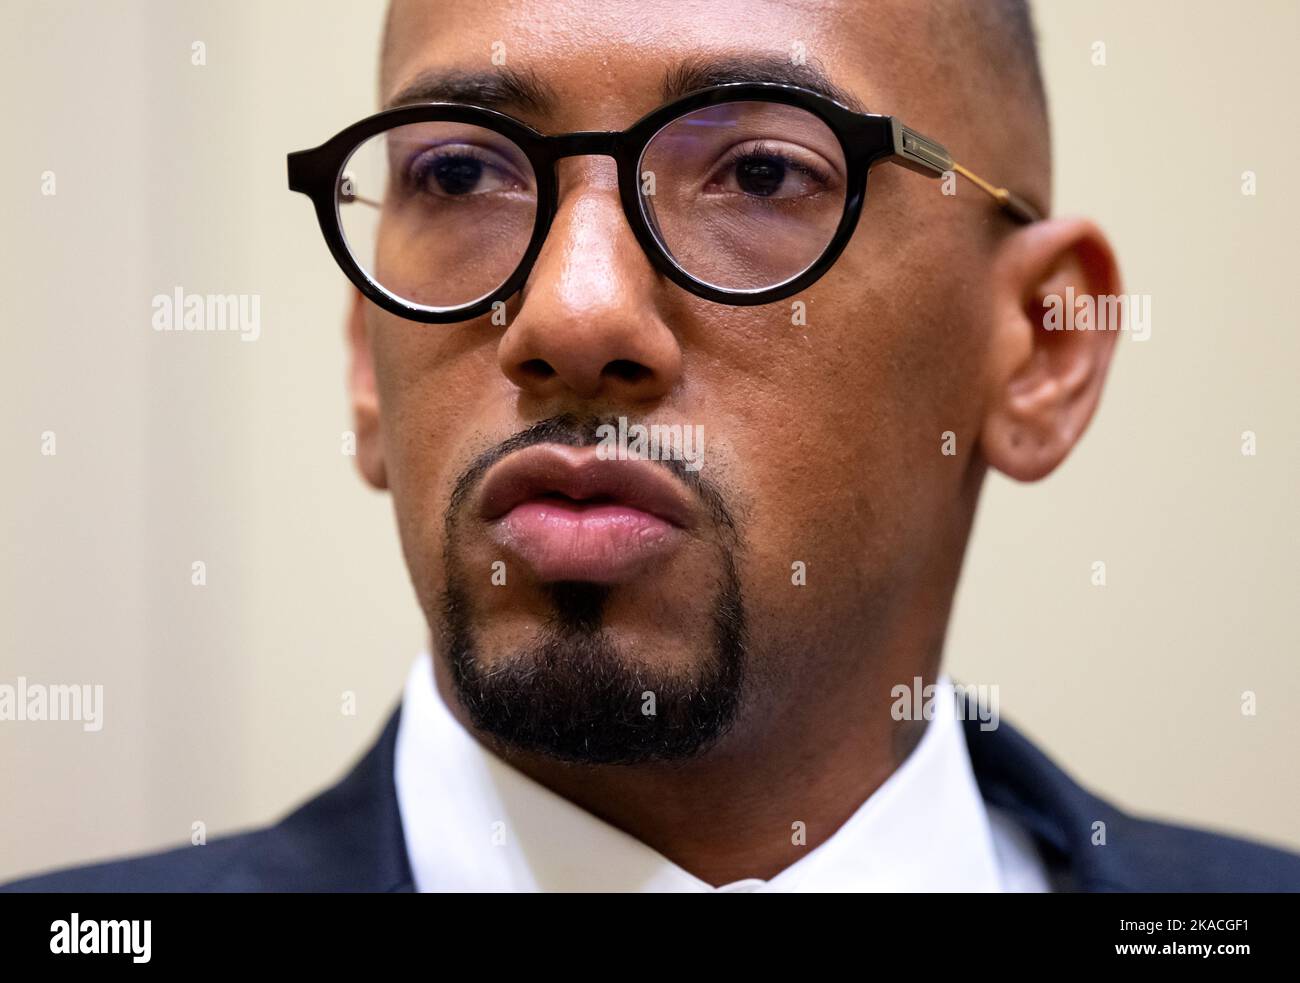 Munich, Germany. 02nd Nov, 2022. Professional footballer and former national team player Jerome Boateng arrives in the courtroom of the Munich I Regional Court at the start of the continuation in the appeal trial. Boateng is accused of beating his ex-girlfriend in 2018 during a joint Caribbean vacation. He was therefore sentenced last year to a fine of 1.8 million euros. He, the public prosecutor's office and his ex-girlfriend as joint plaintiff appealed against this decision of the Munich Local Court. Credit: Sven Hoppe/dpa/Alamy Live News Stock Photo